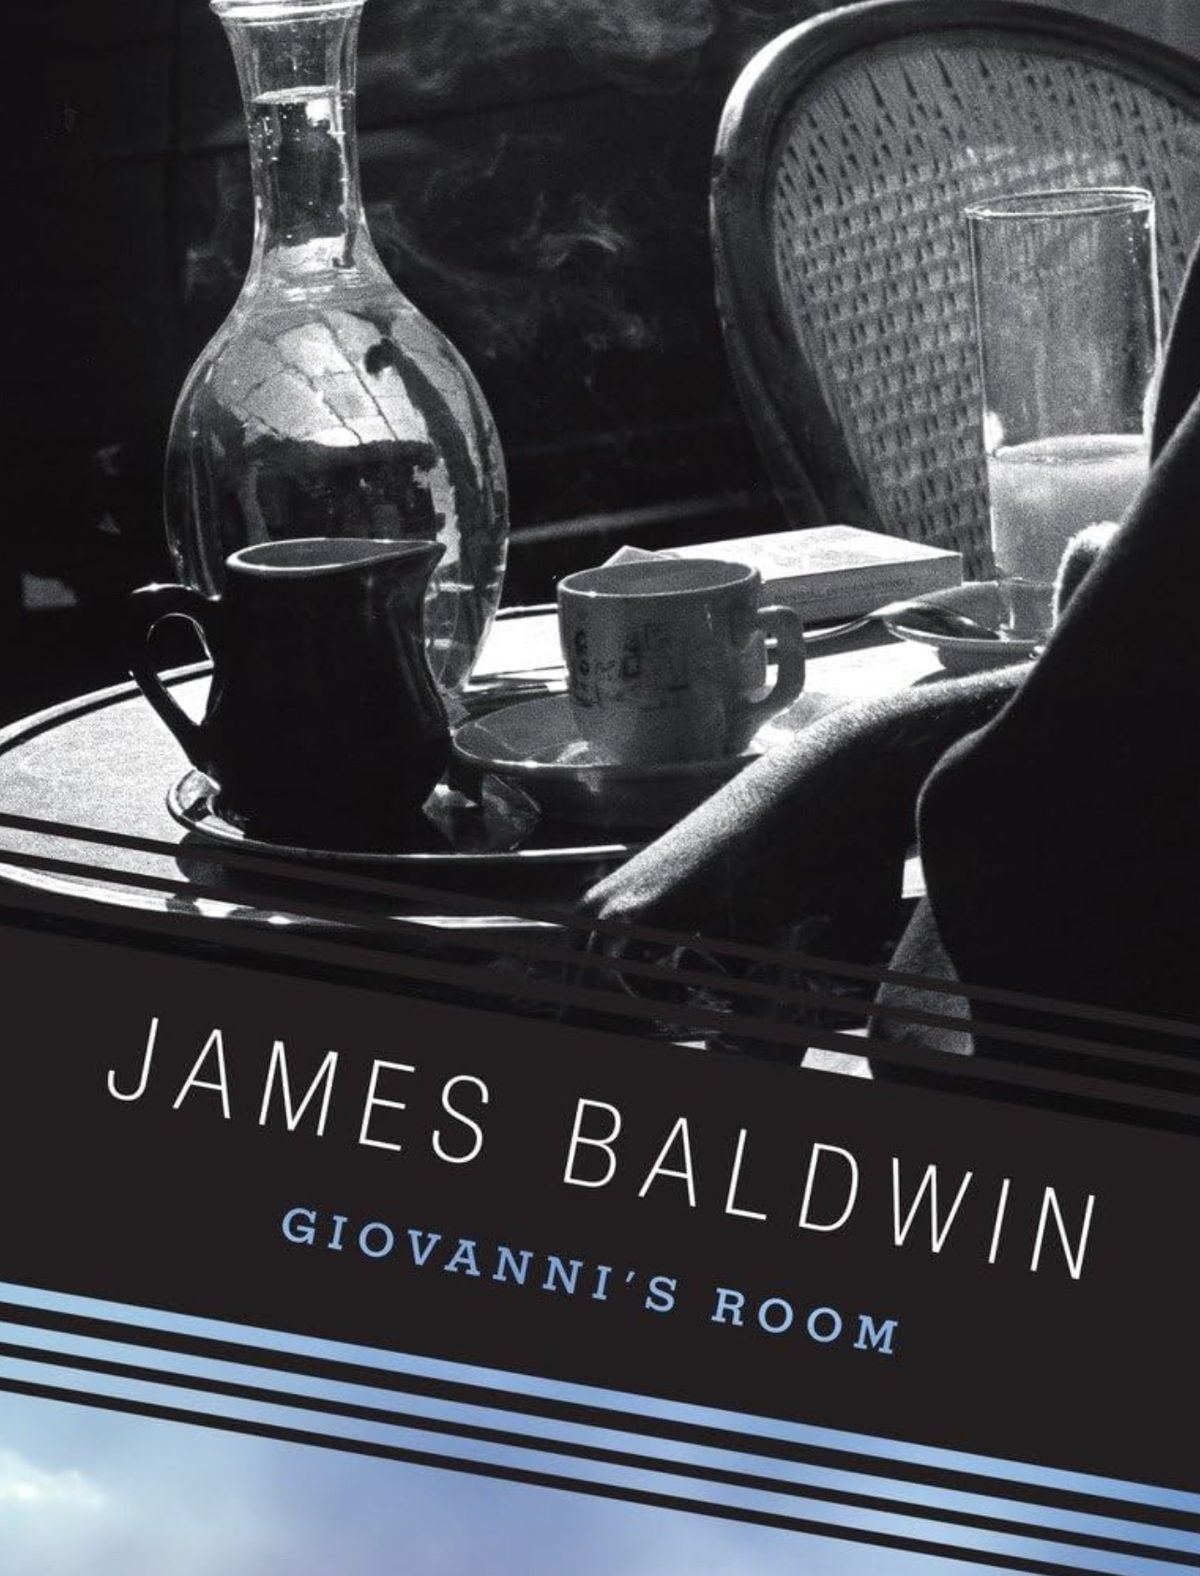 Storms and Stories presents: Giovanni\u2019s Room by James Baldwin